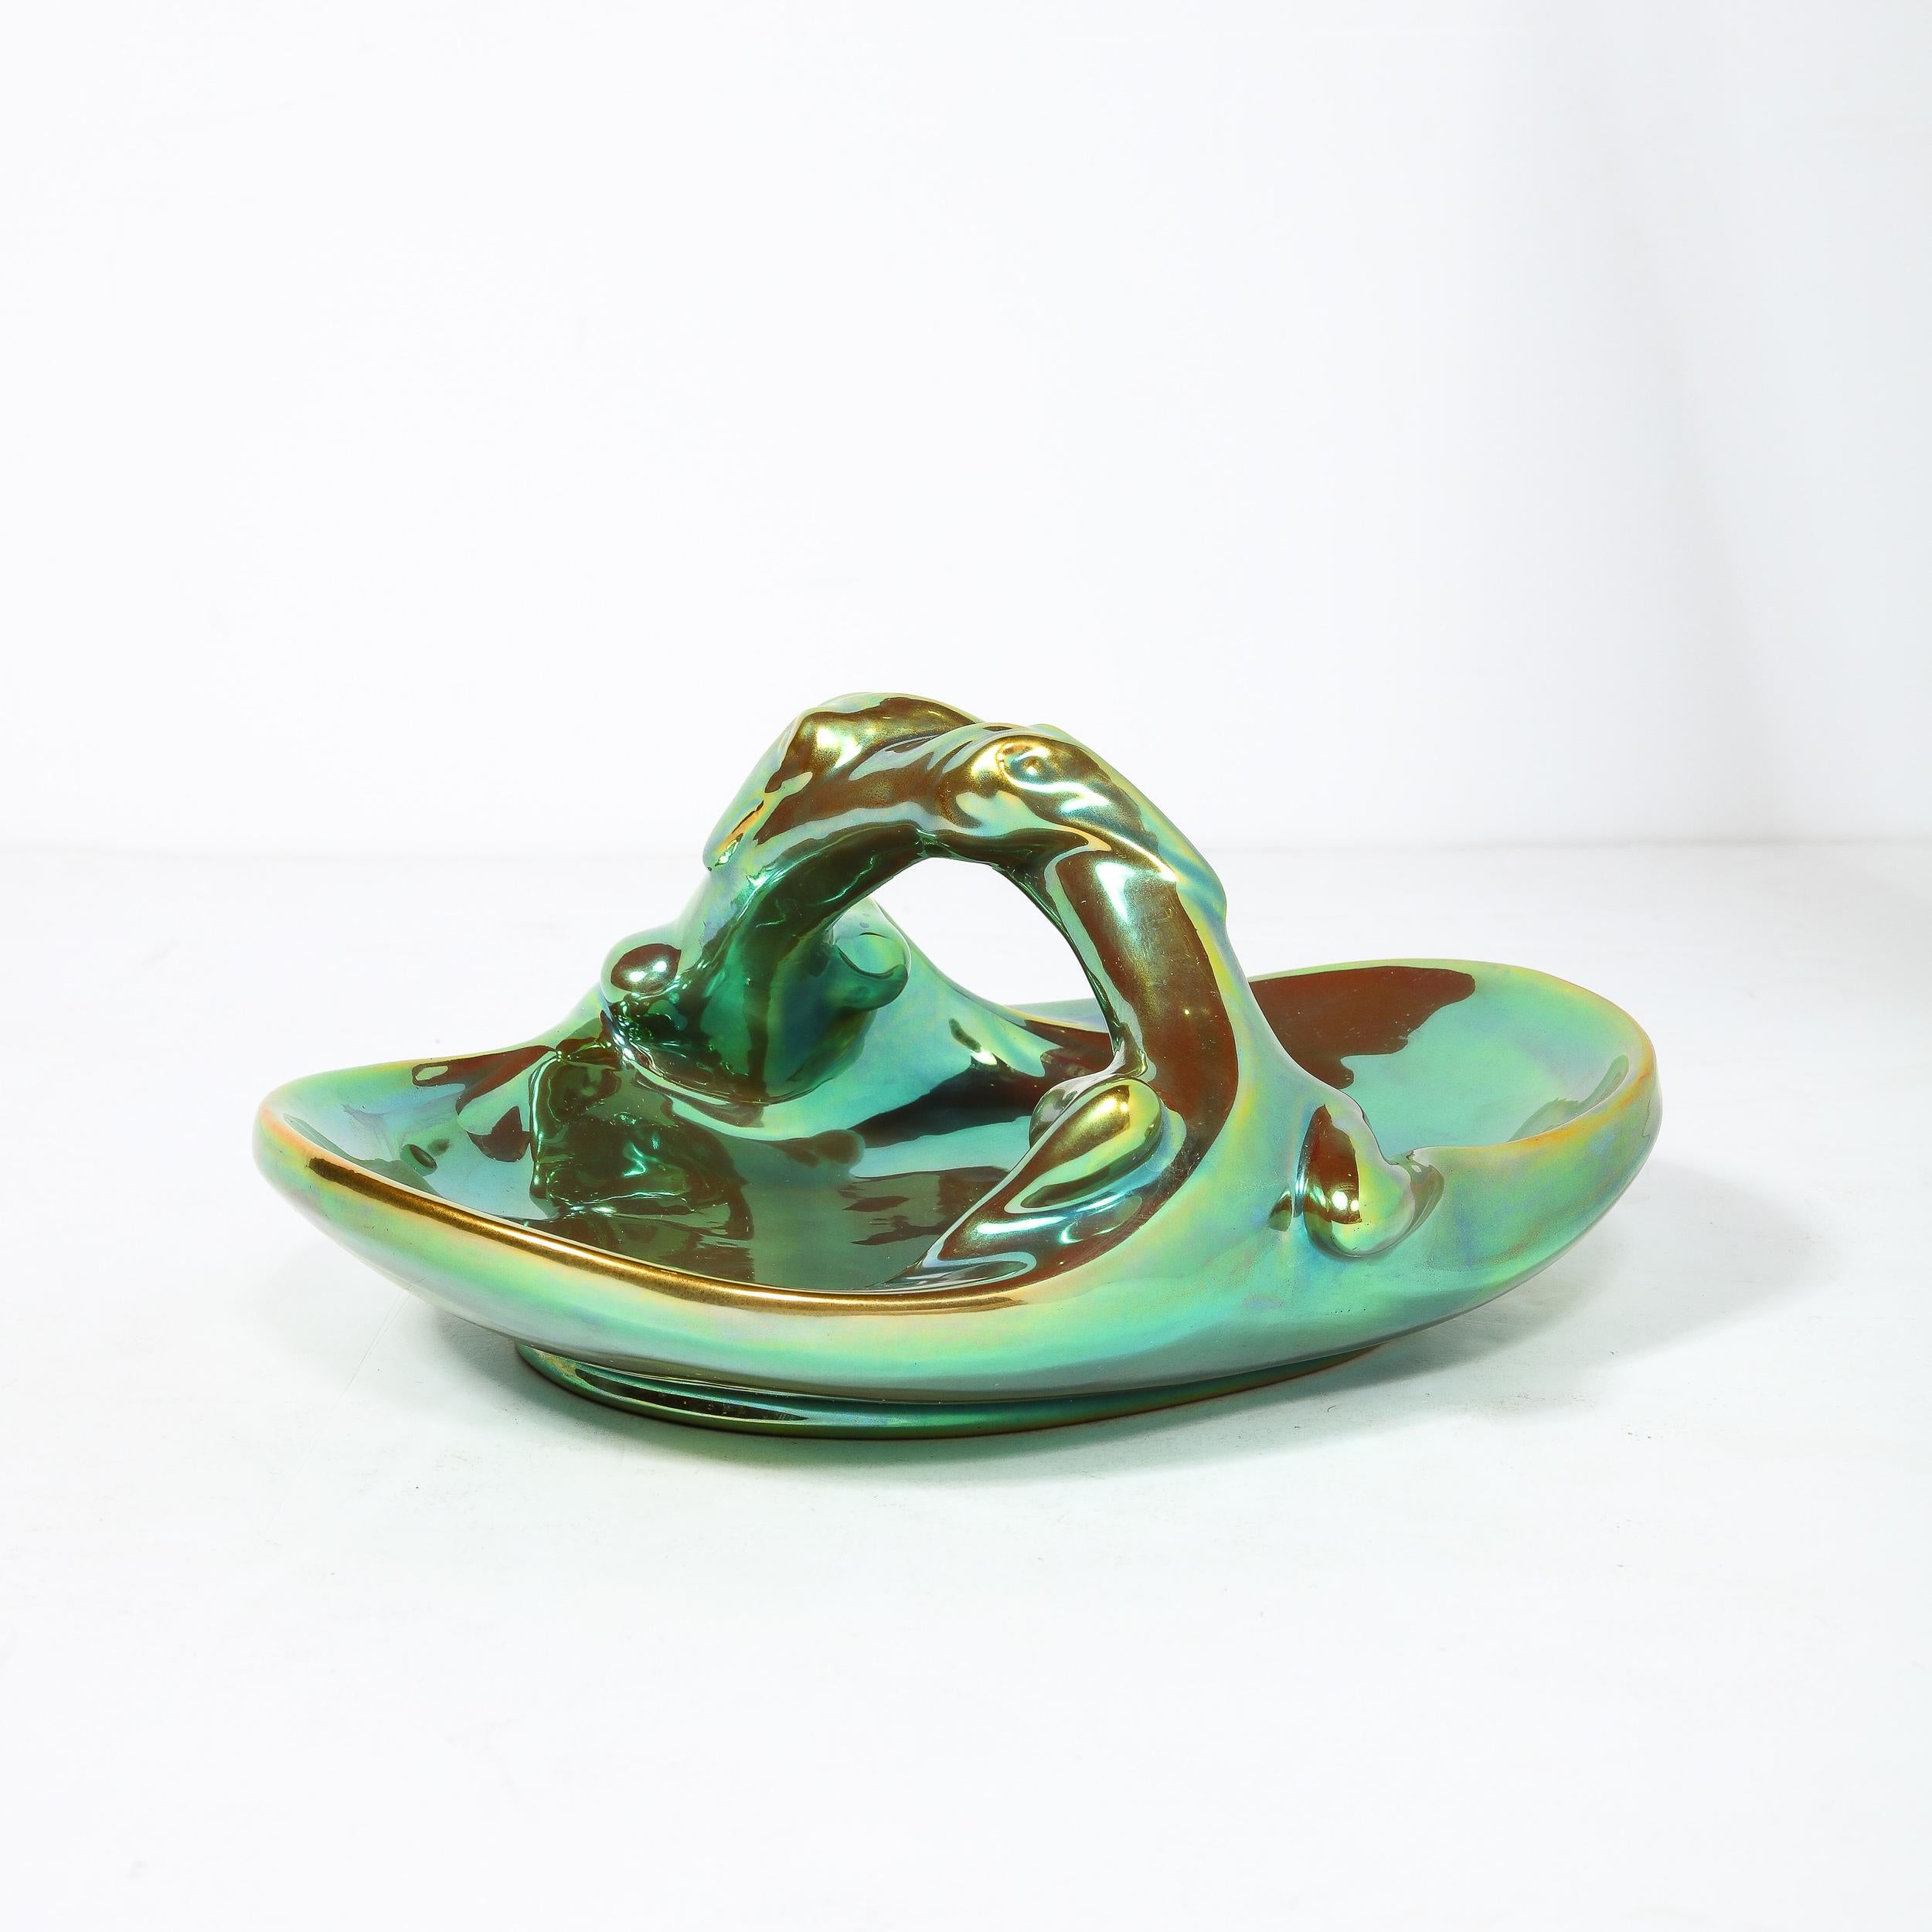 Art Deco Basket Form Ceramic Dish of Entwined Lizards by Zsolnay Eosin For Sale 10